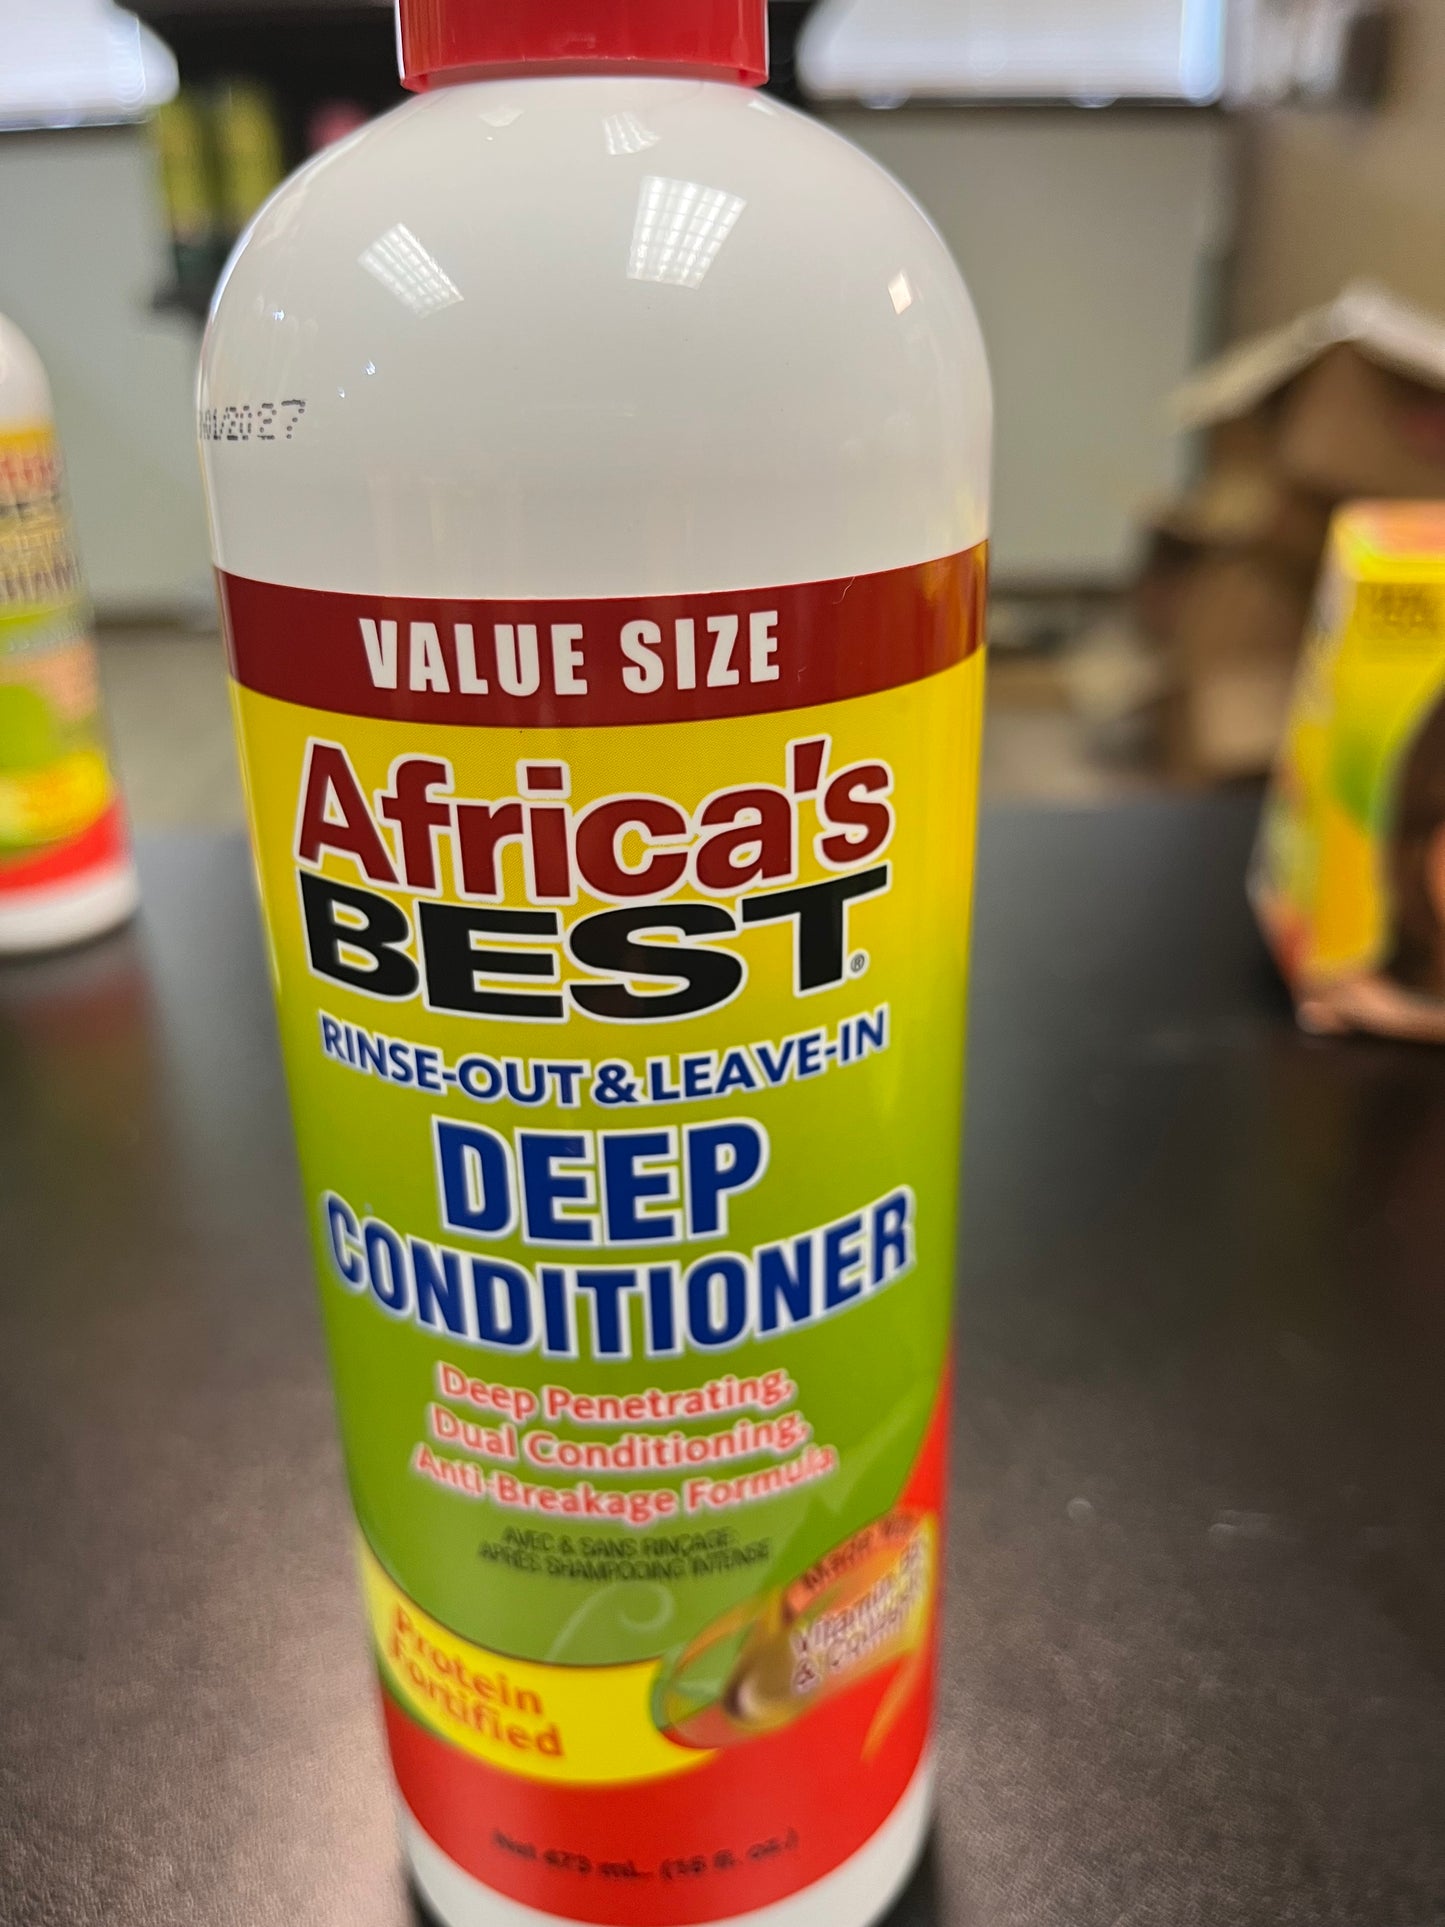 AFRICA'S BEST RINSE-OUT & LEAVE-IN DEEP CONDITIONER 16 OZ